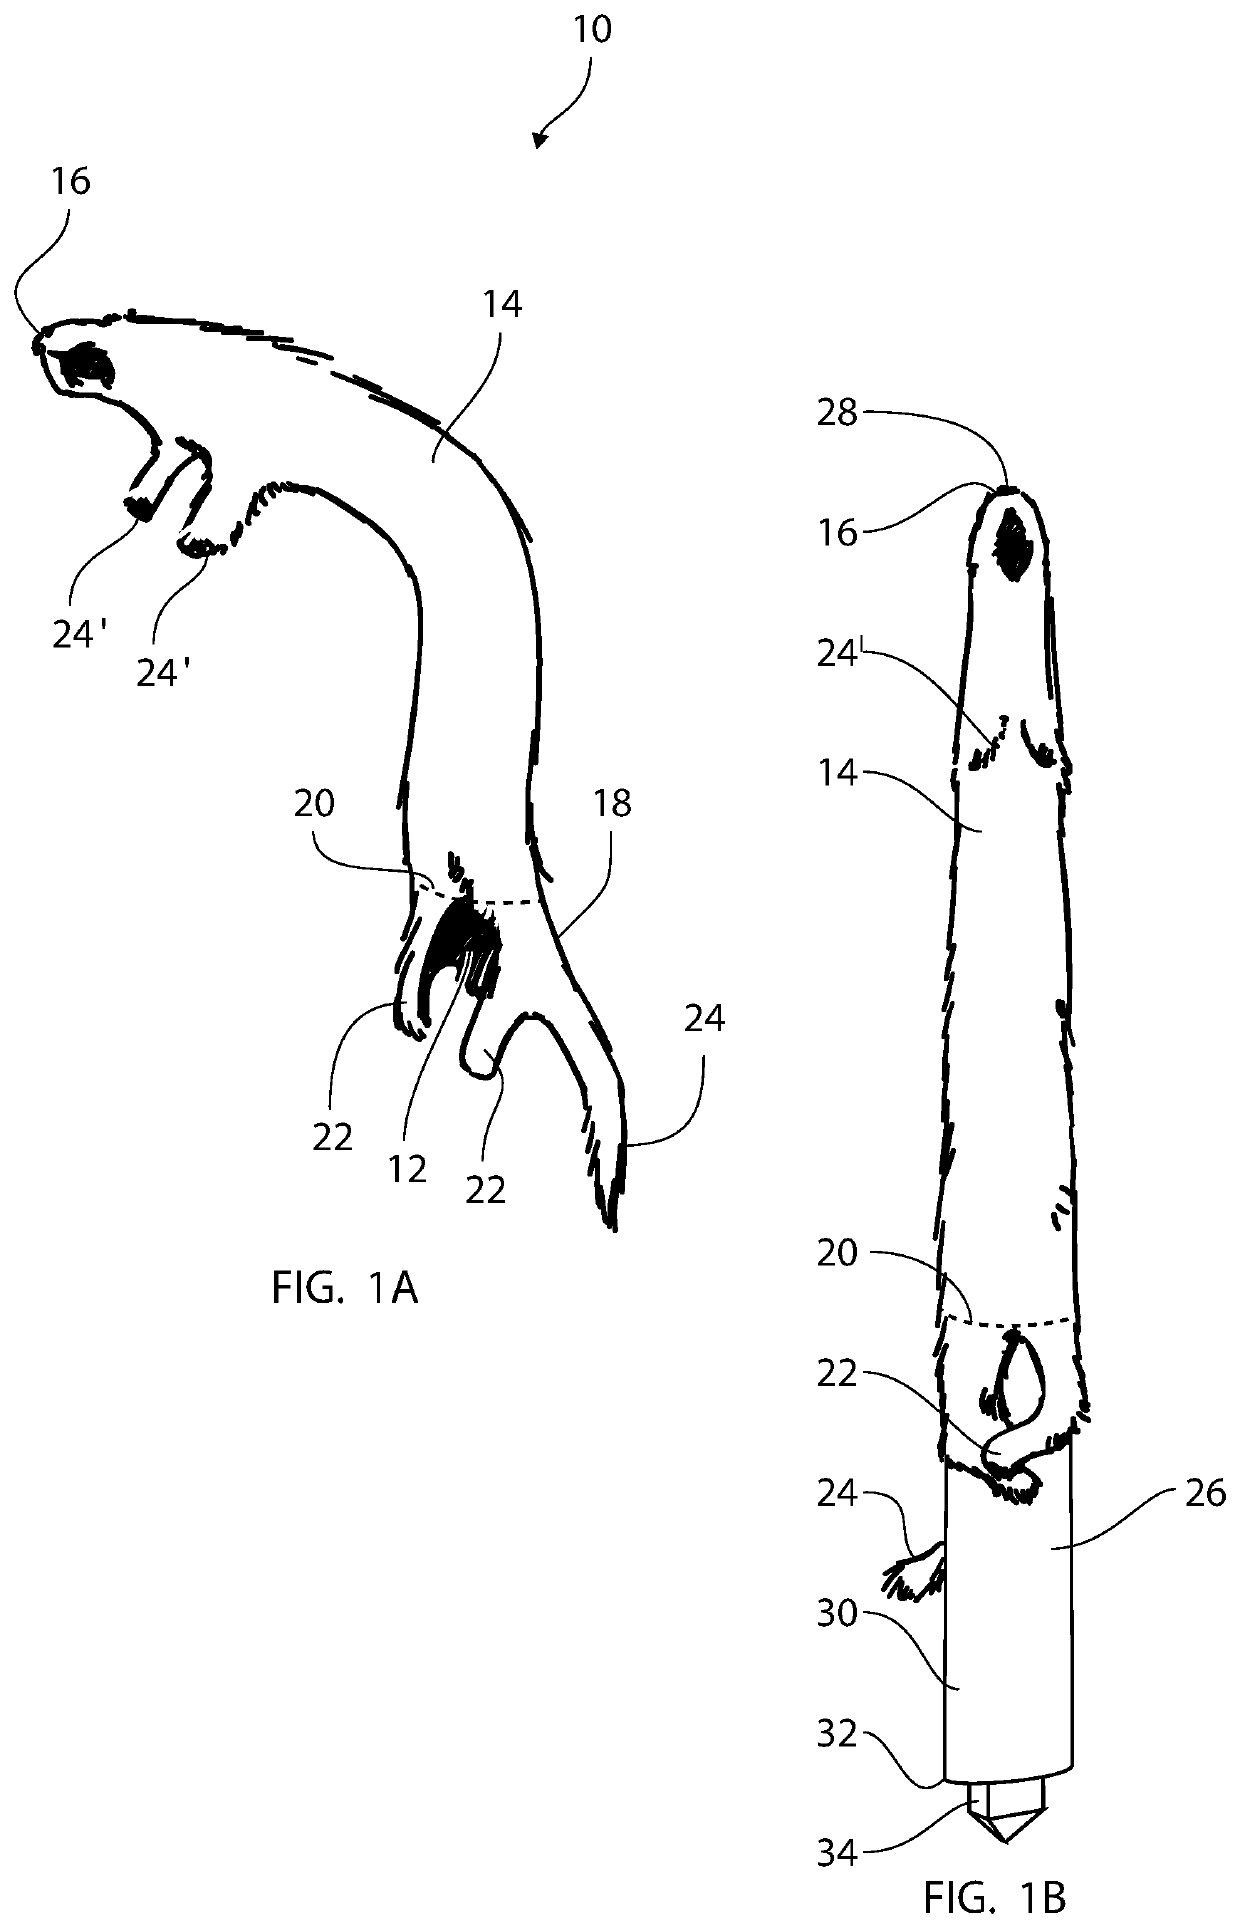 Apparatuses and methods for stretching a pelt on a pelt board